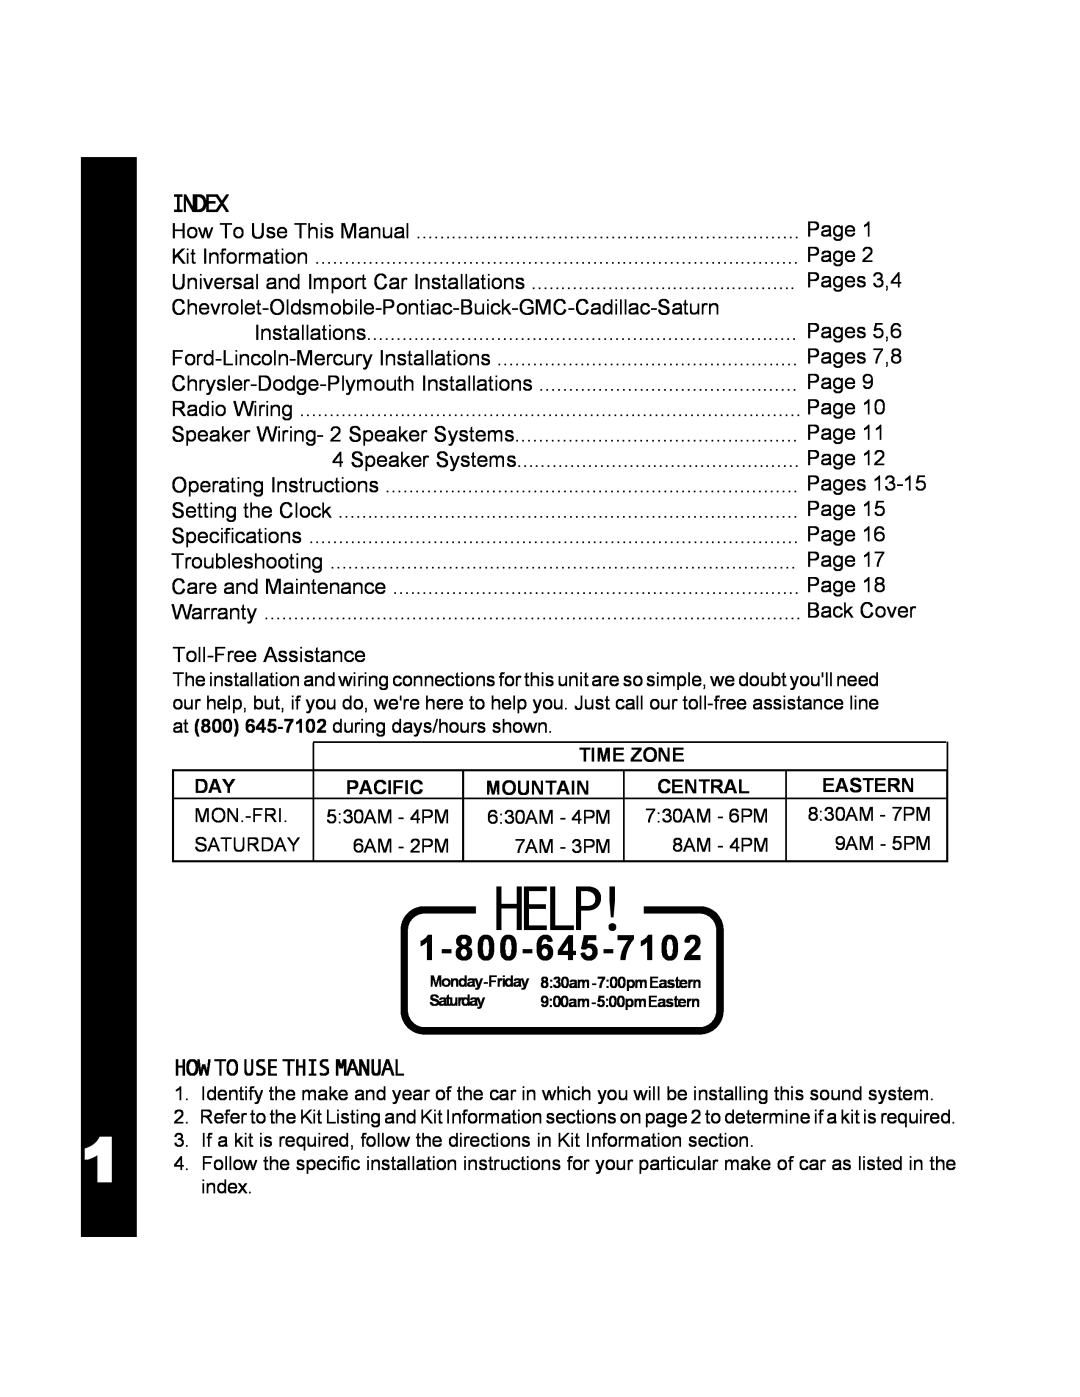 Audiovox 990 Help, Index, Howtousethismanual 